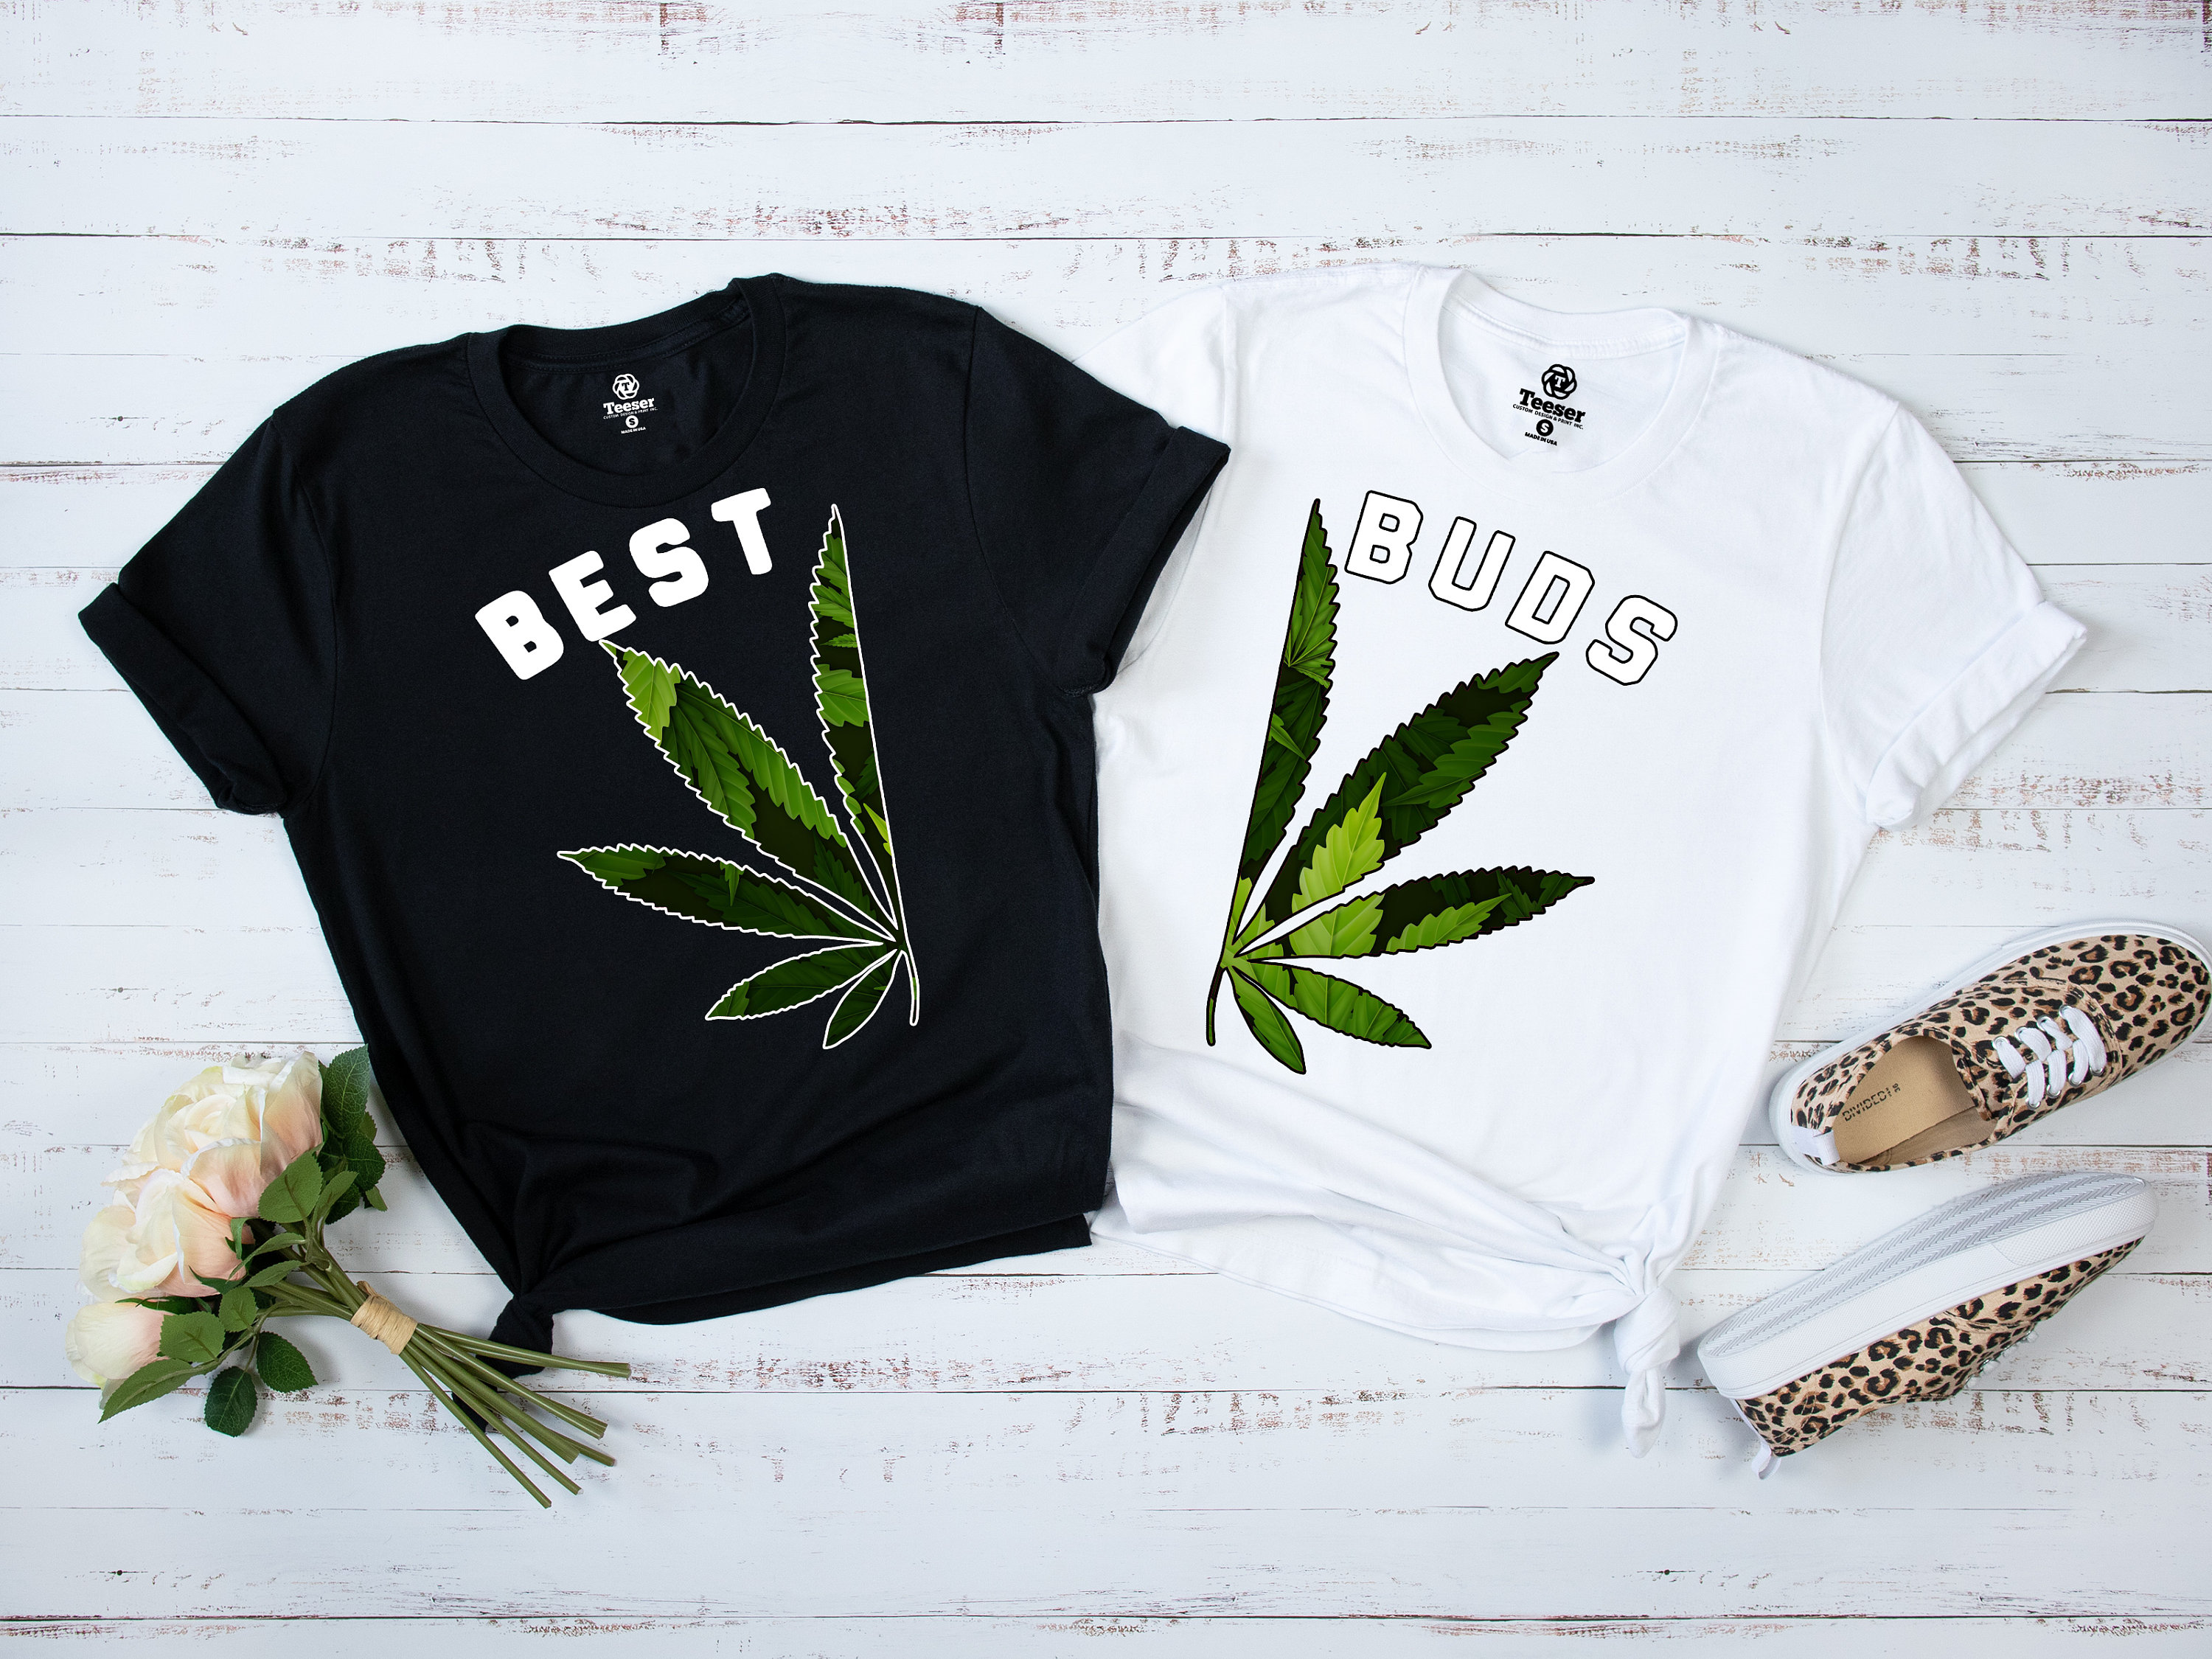 Personable, Playful, Cannabis T-shirt Design for SD by SATHIRA